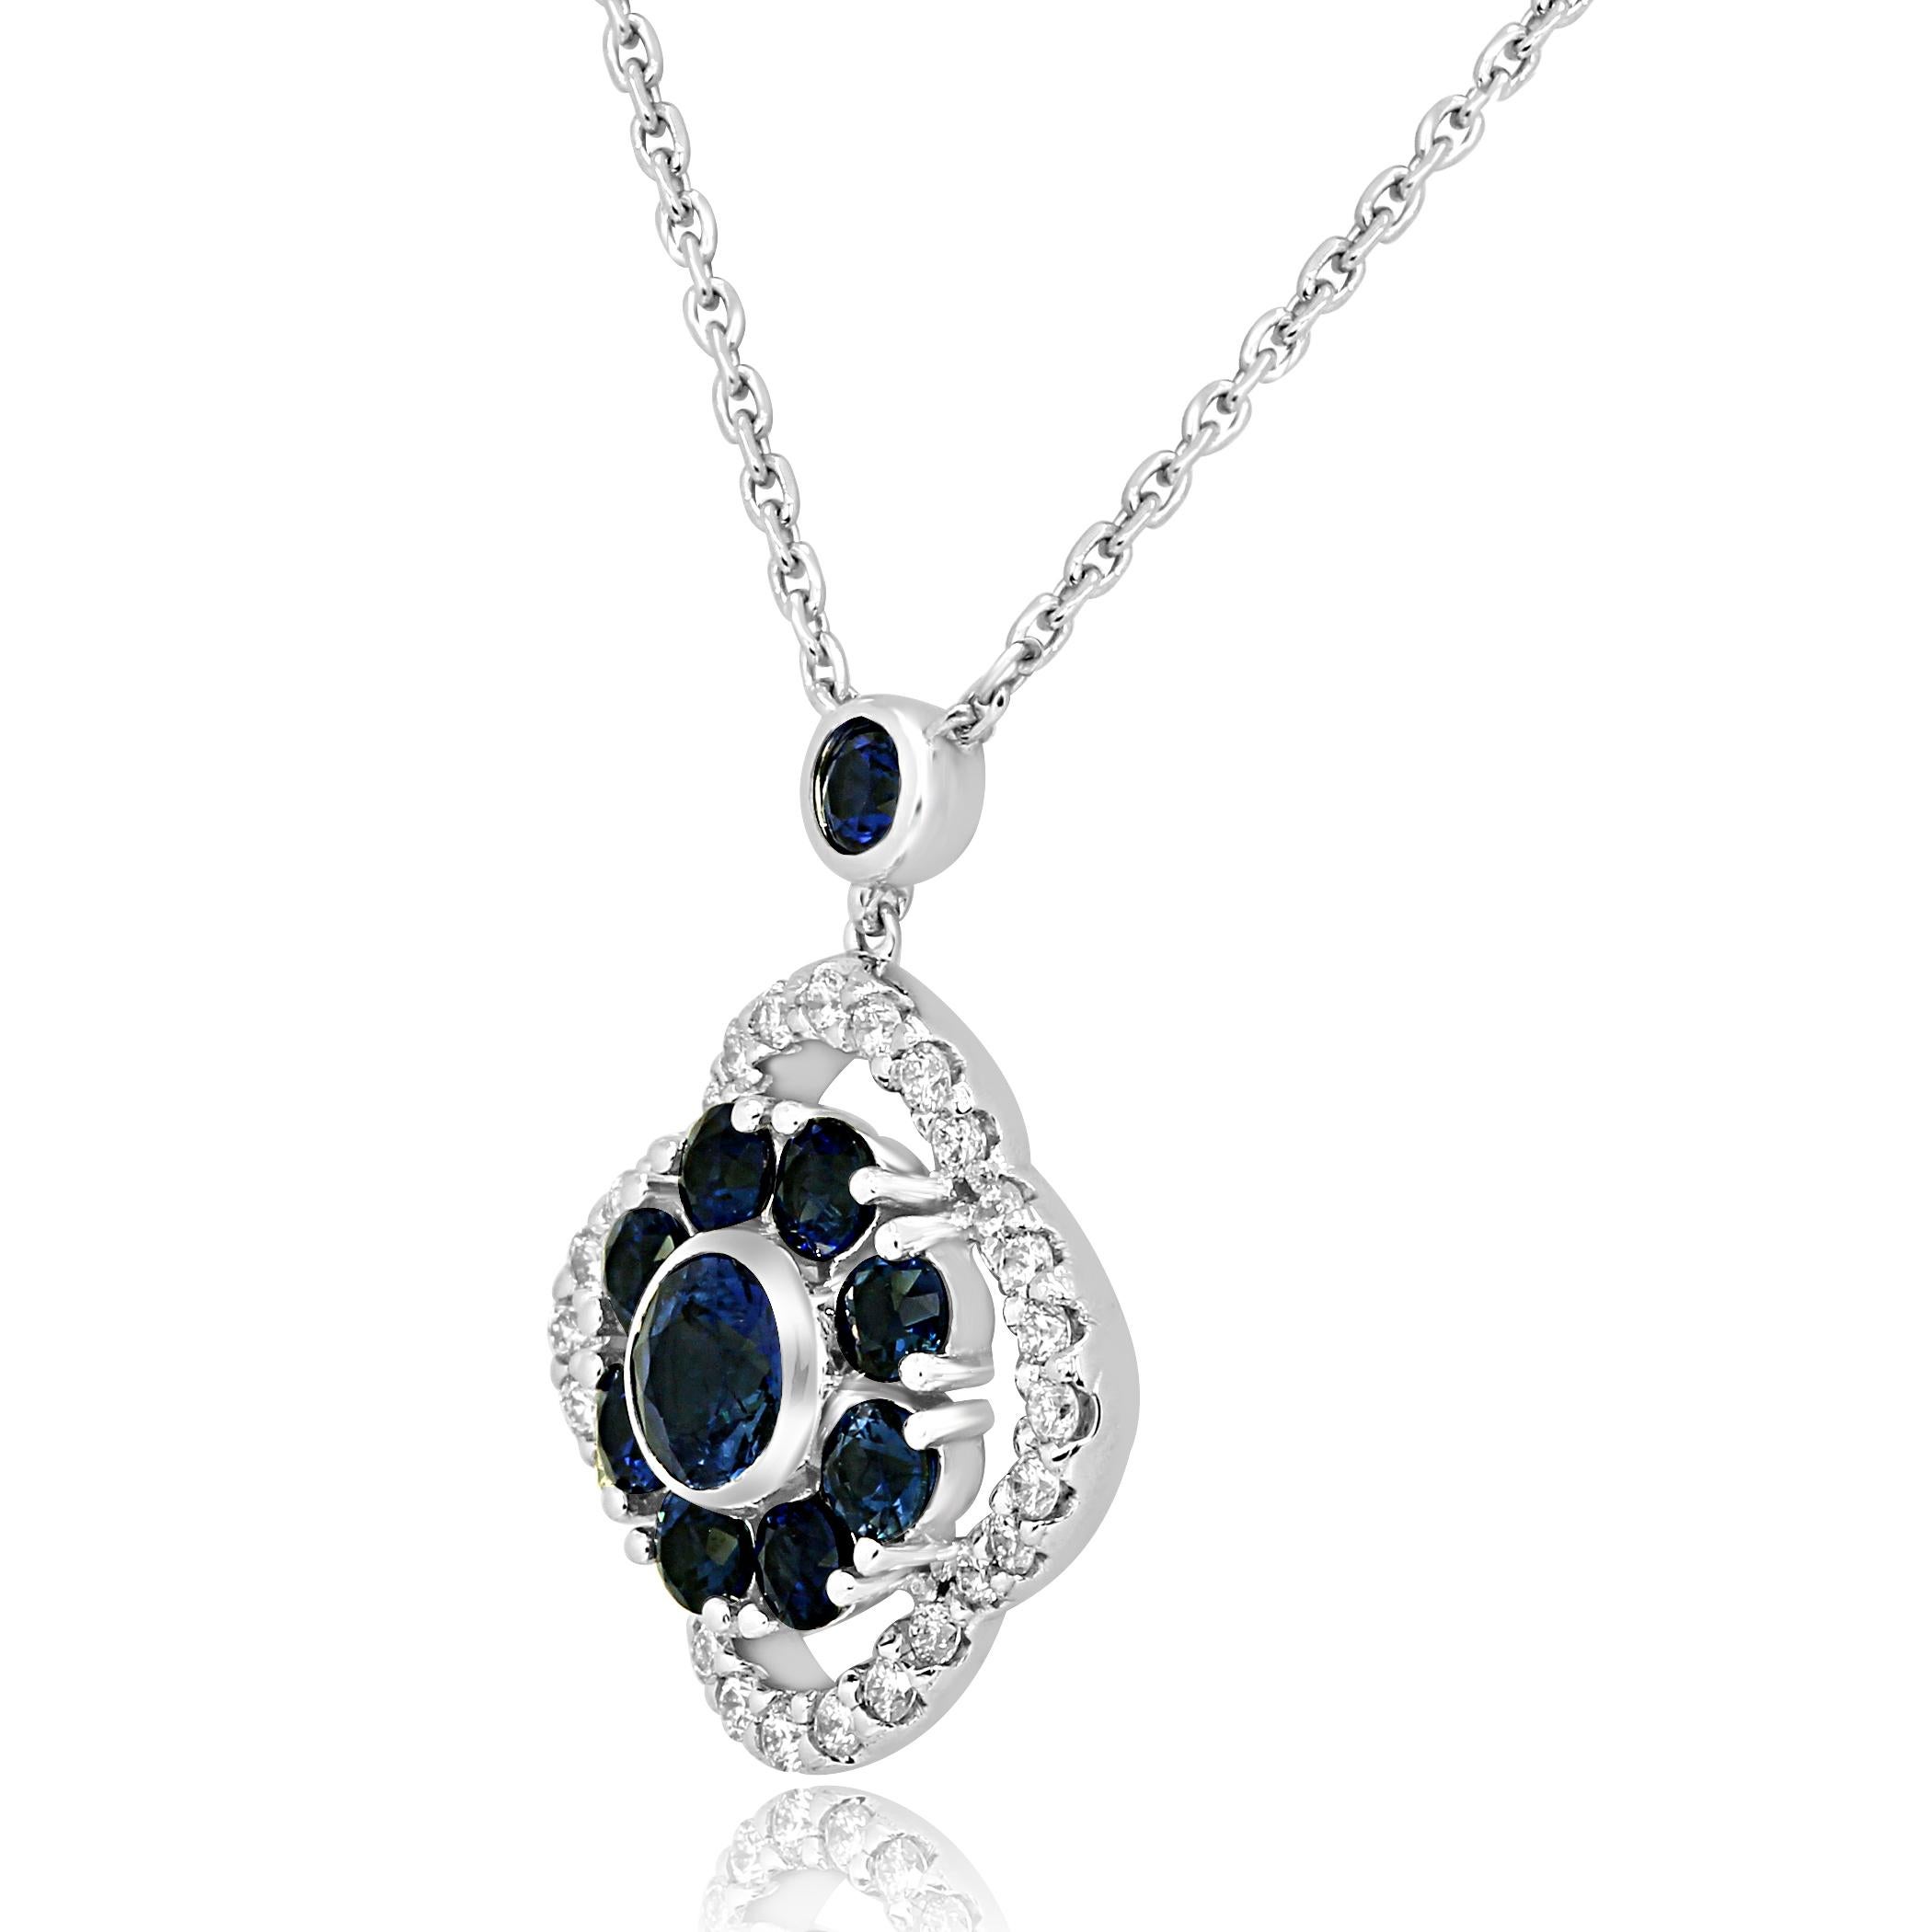 10 Blue Sapphire Round 1.88 Carat Encircled by White Diamond 0.41 Carat in 14K White Gold Stunning Drop Necklace.

MADE IN USA
Total Stone Weight 2.29 Carat